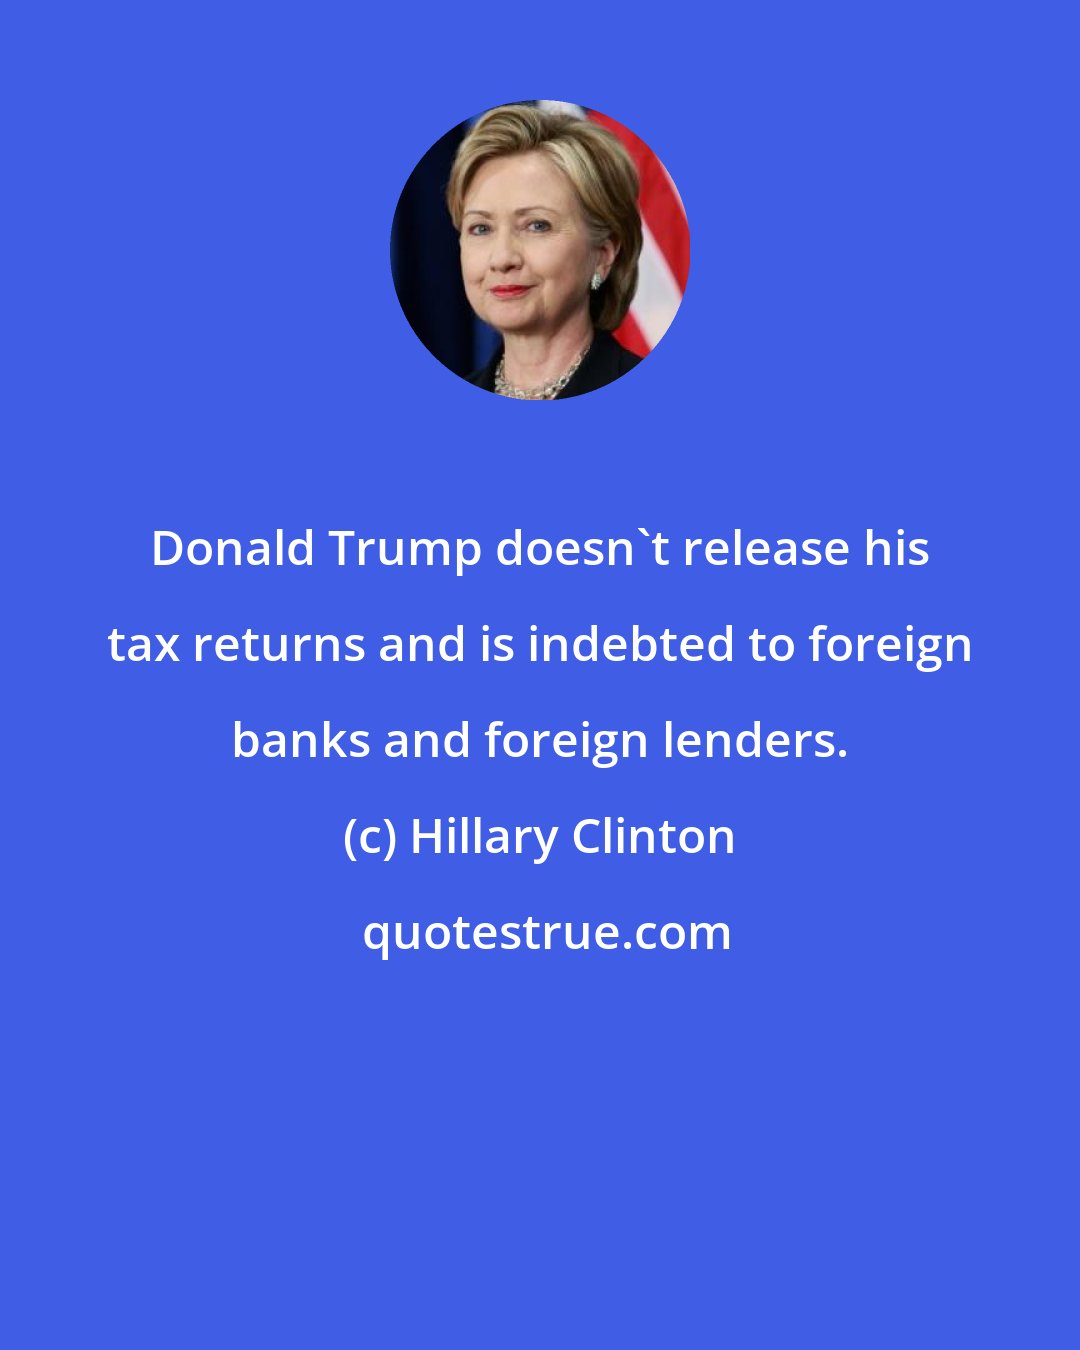 Hillary Clinton: Donald Trump doesn't release his tax returns and is indebted to foreign banks and foreign lenders.